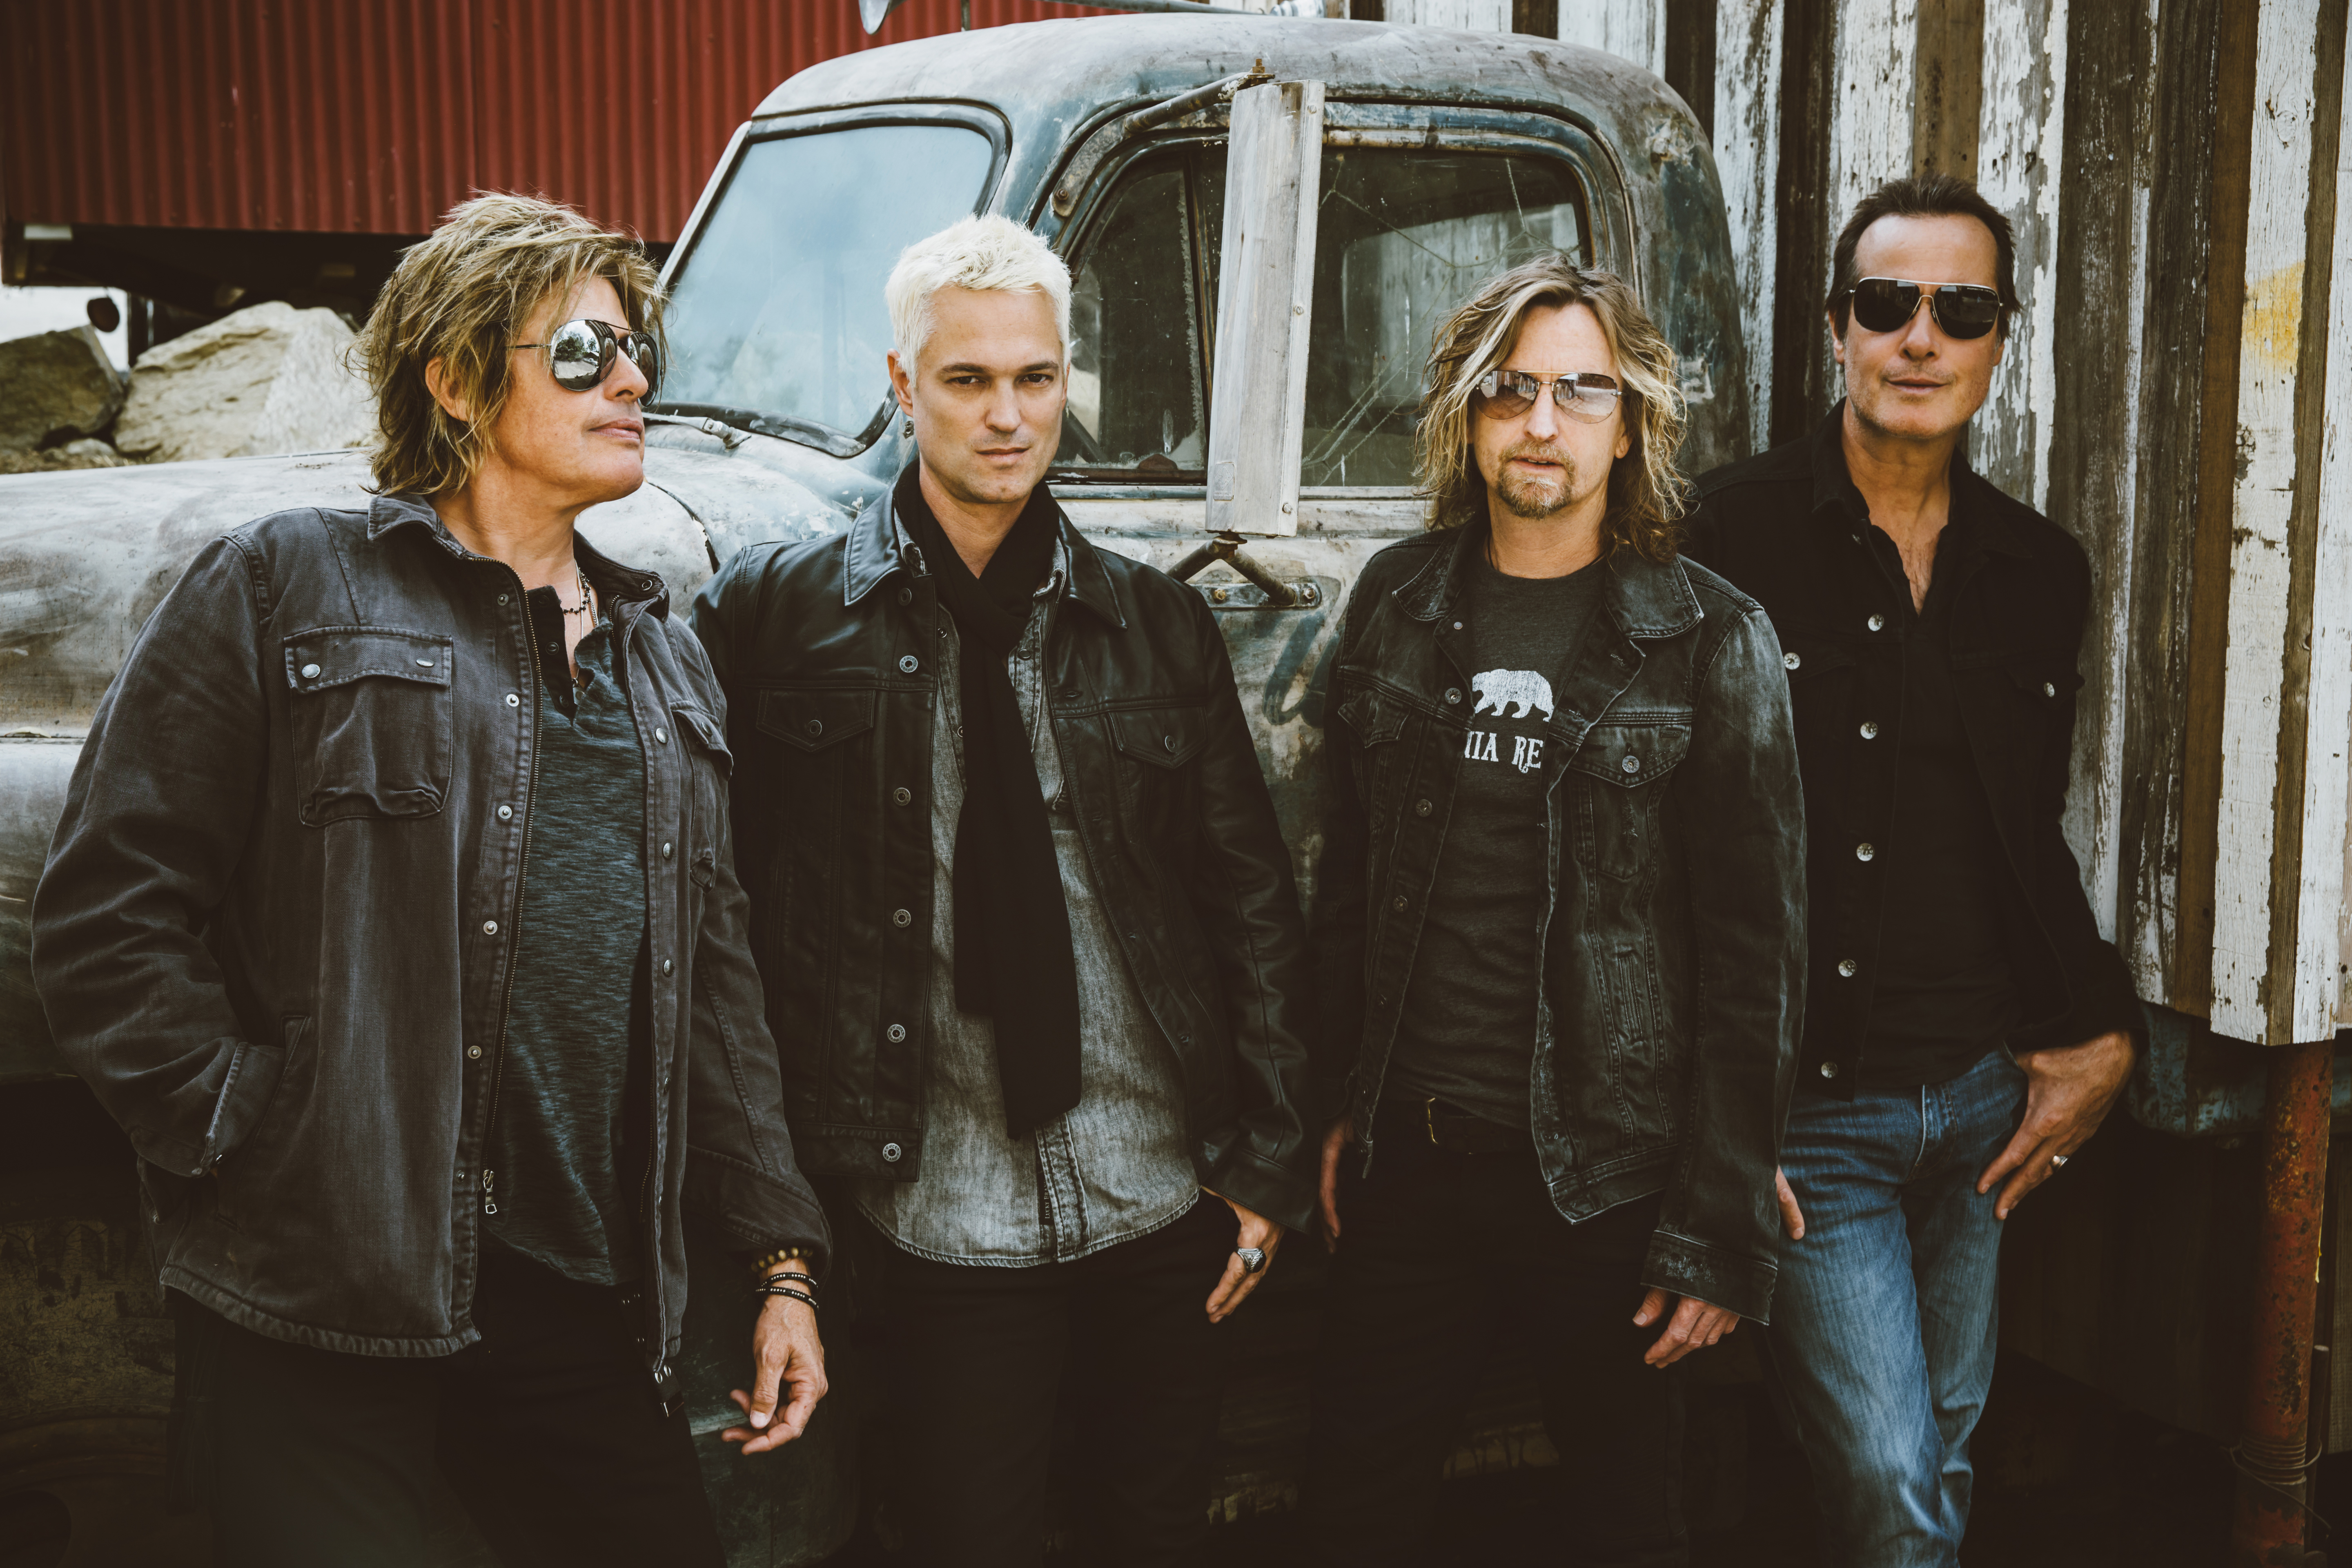 Stone Temple Pilots to Rock the Chevrolet Detroit Grand Prix presented by Lear on Sunday, June 2